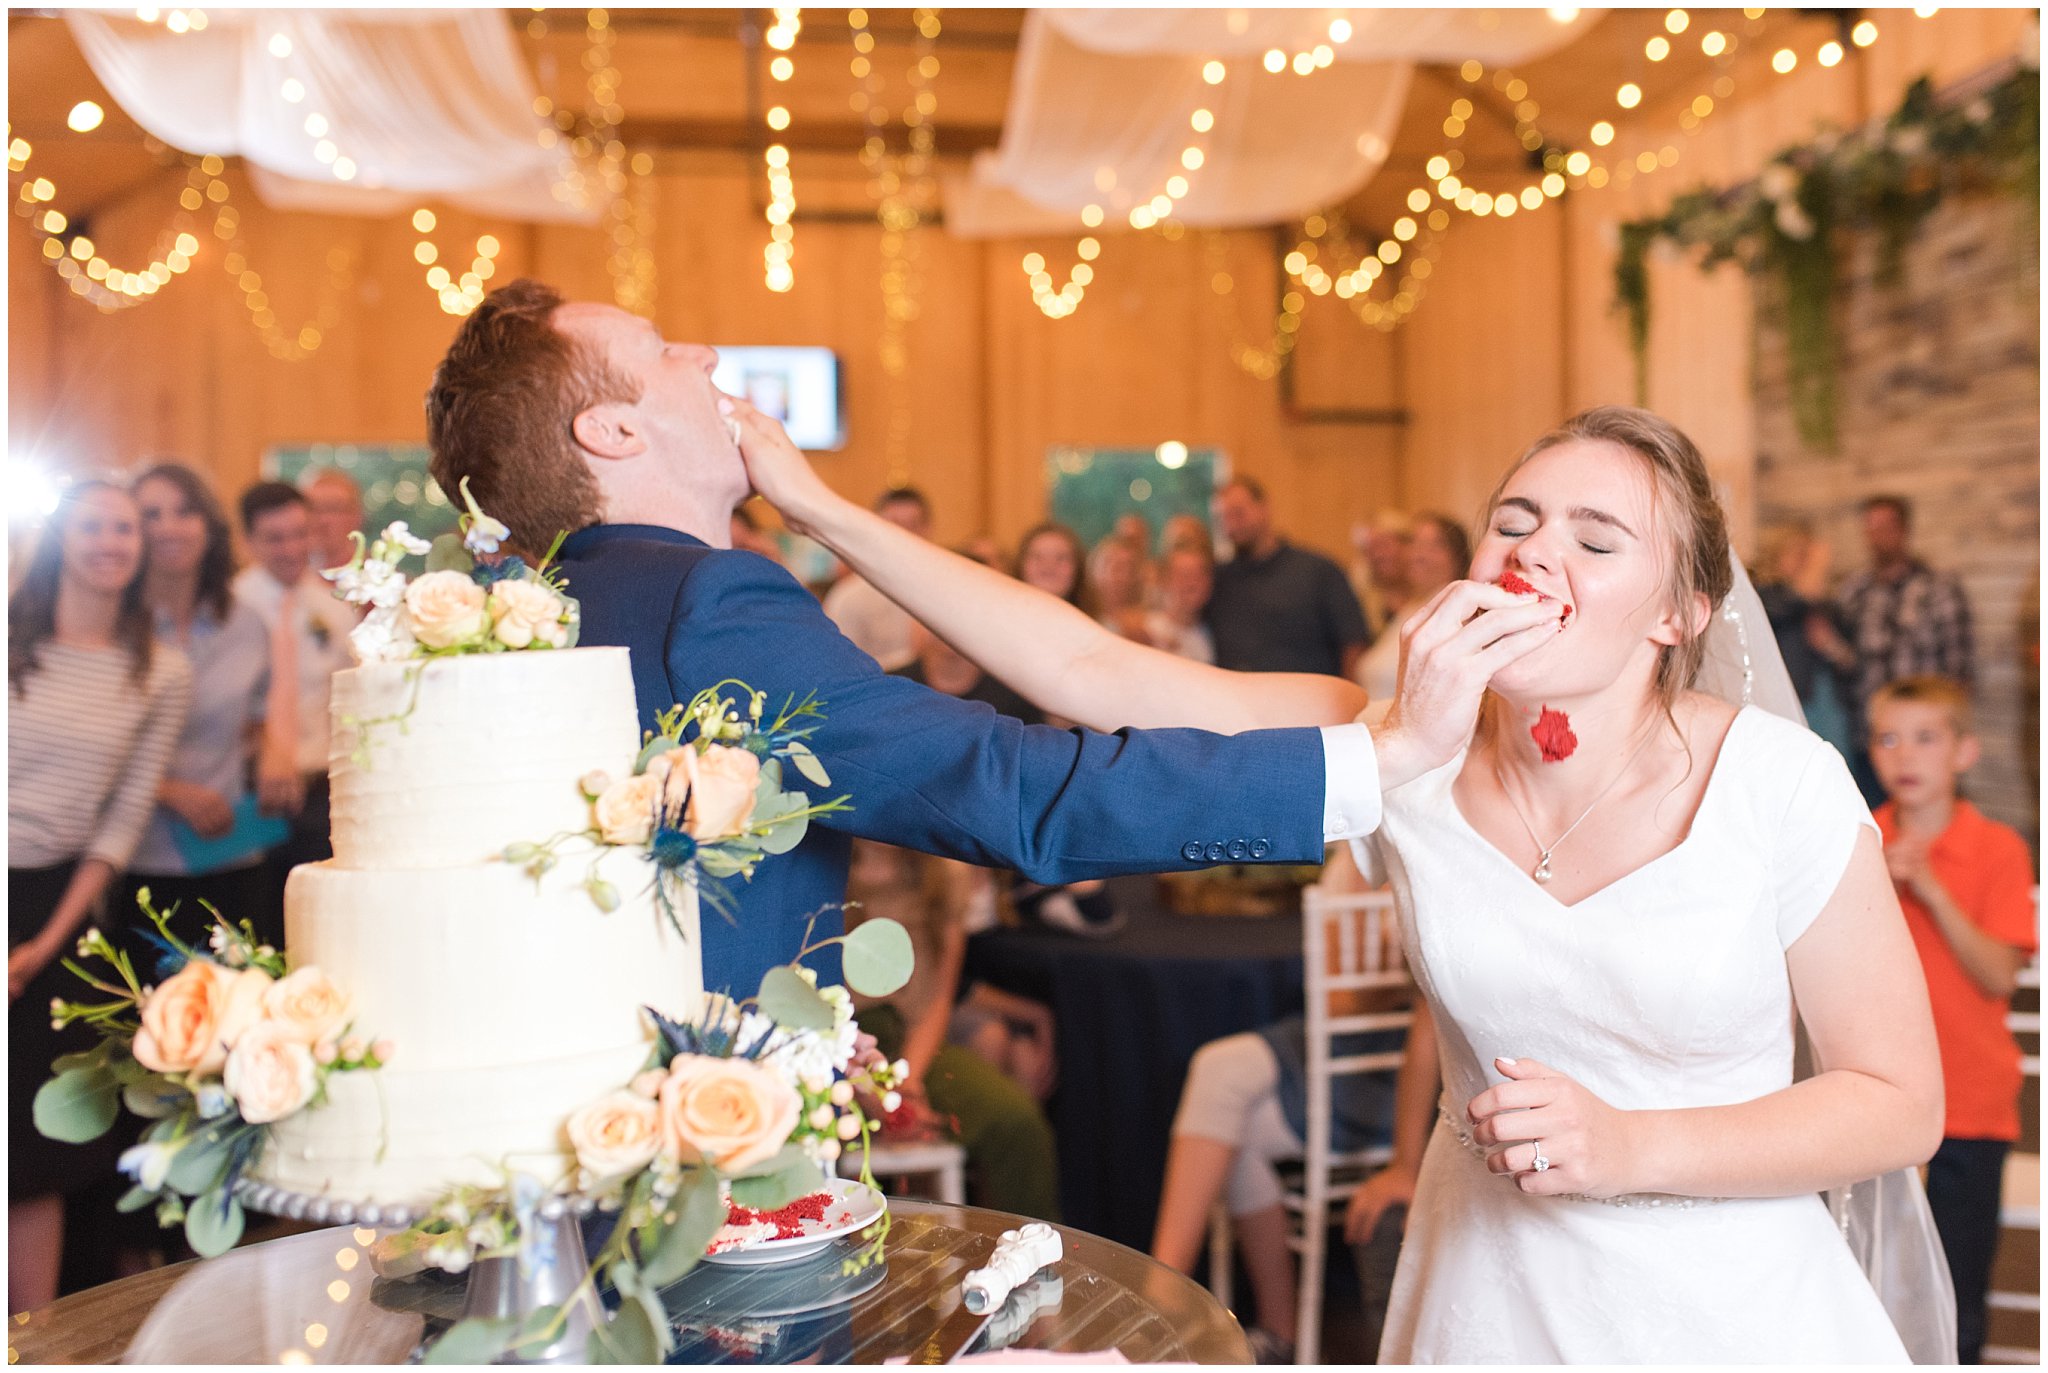 Bride and groom cake smash at Oak Hills Reception and Event Center | Top Utah Wedding and Couples Photos 2019 | Jessie and Dallin Photography